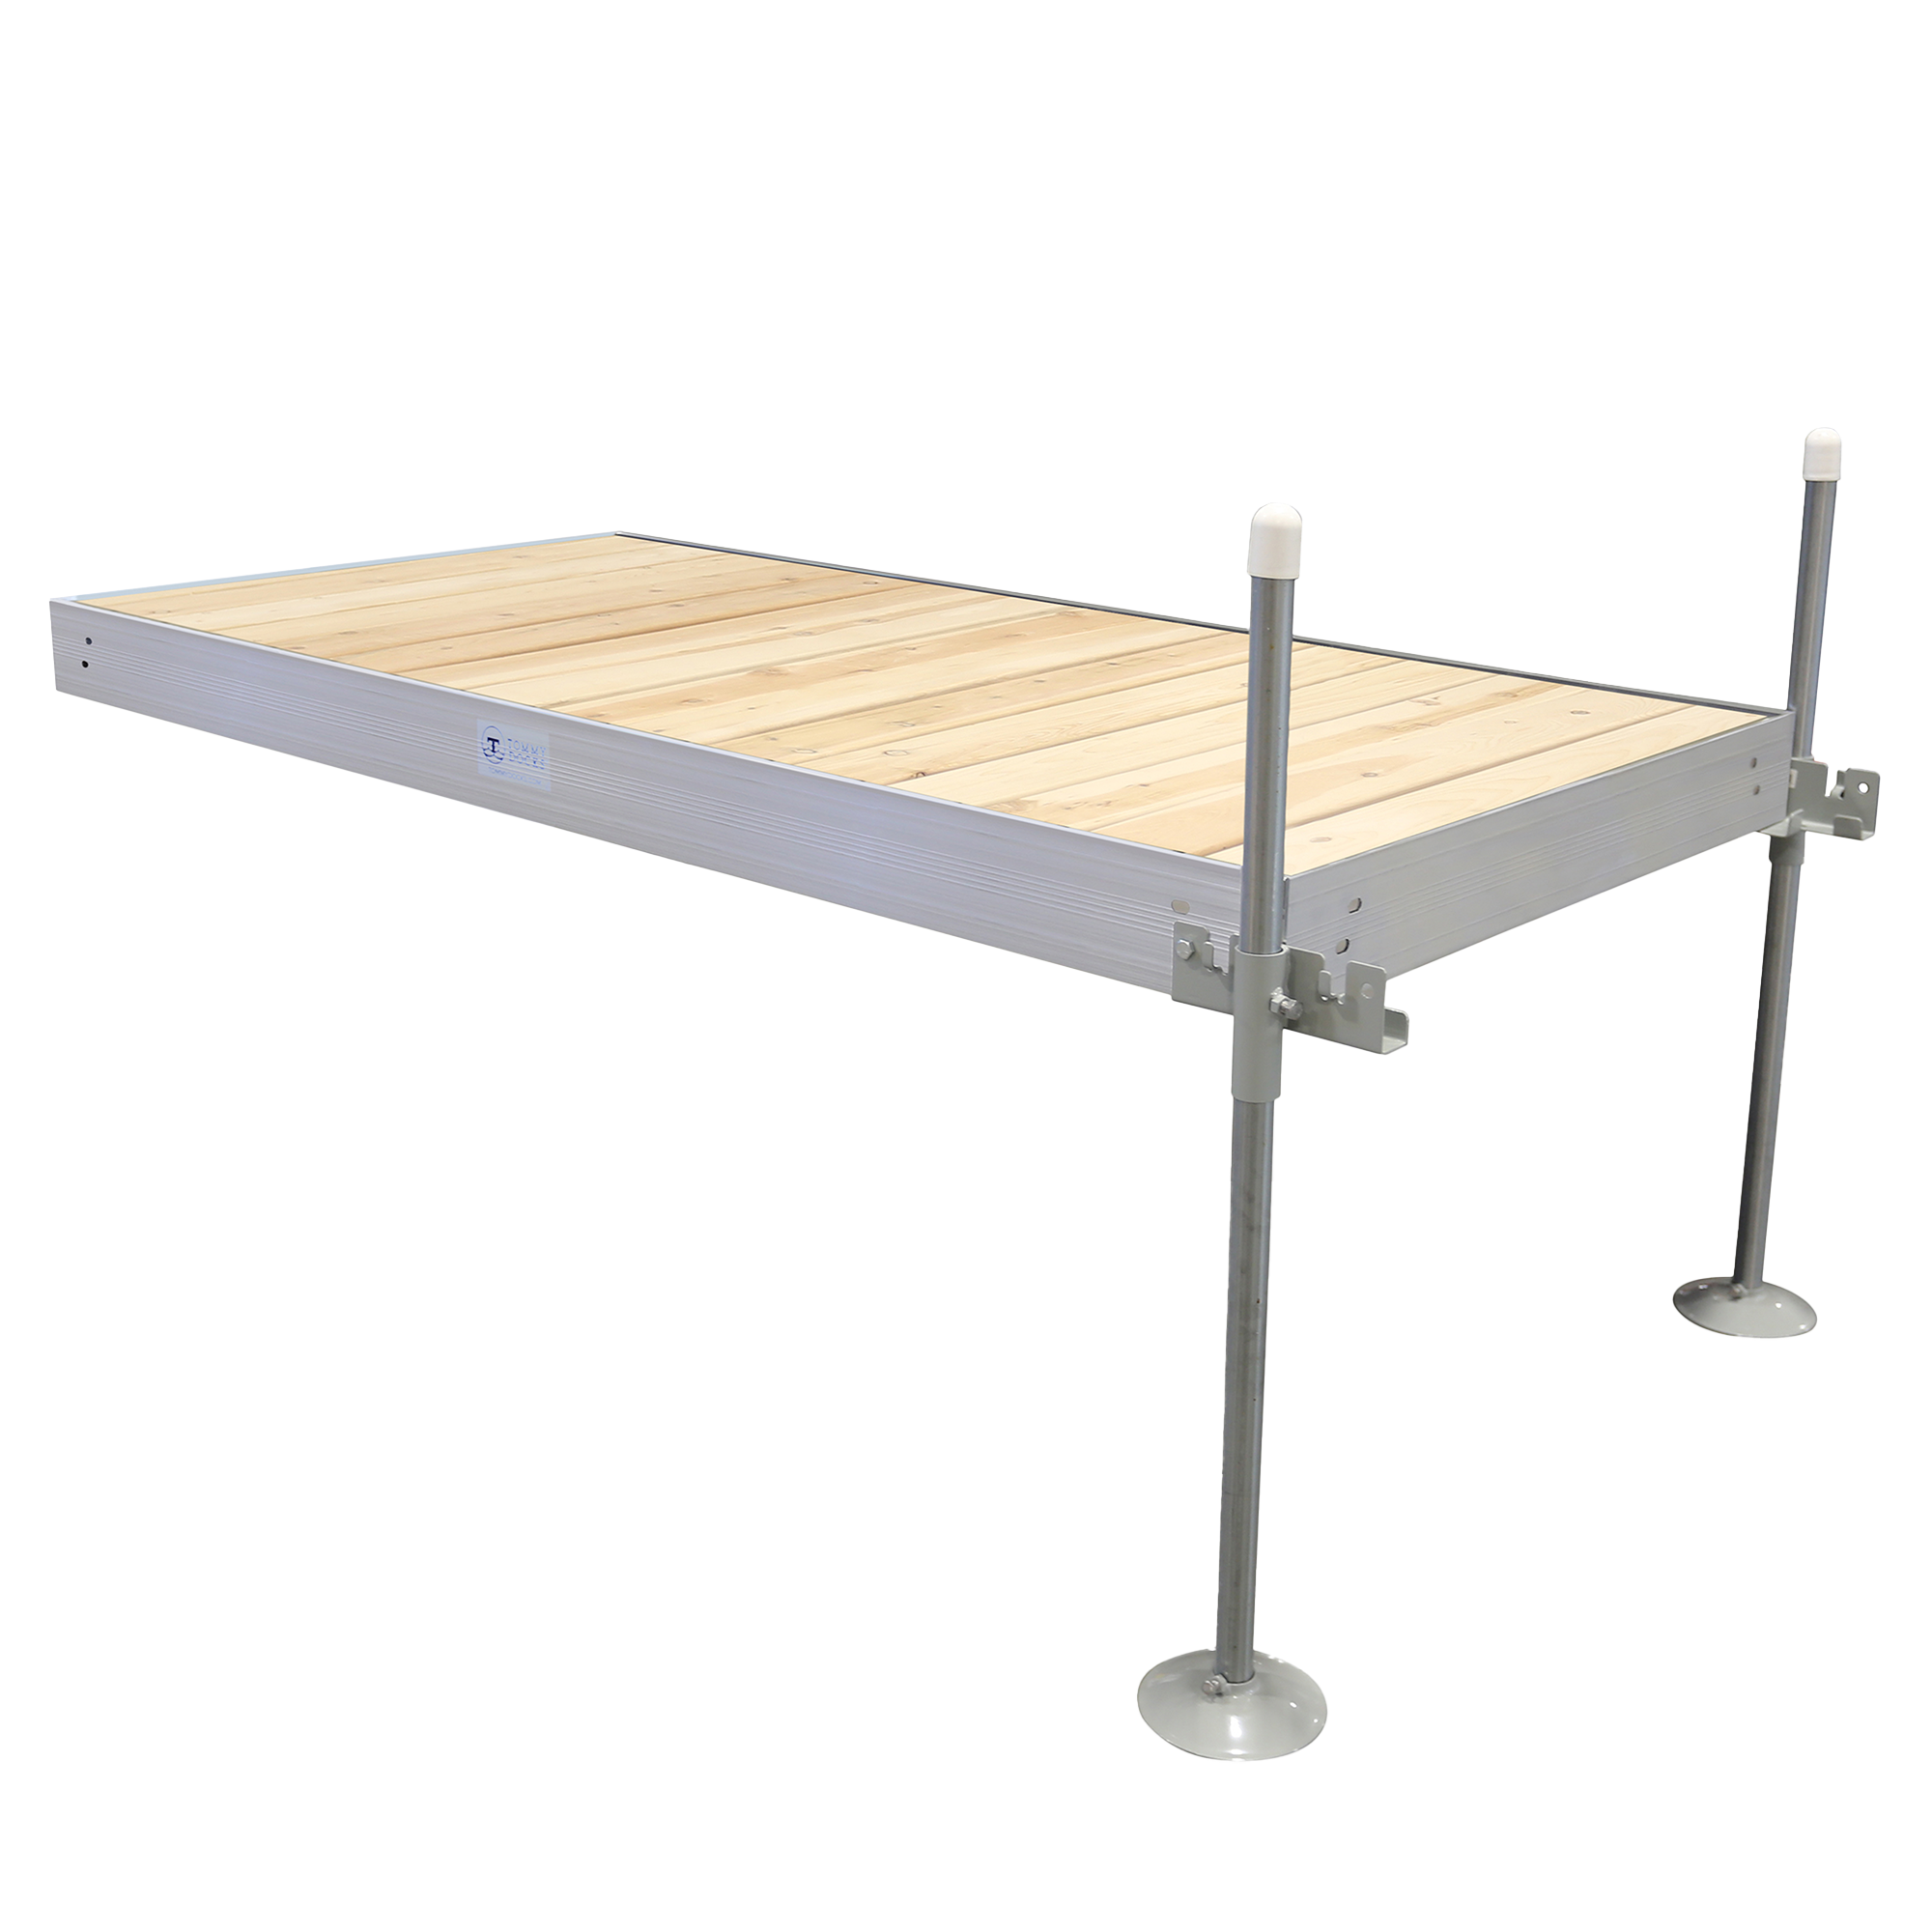 8' Straight Boat Dock System Extender Package with Aluminum Frame and Cedar Decking